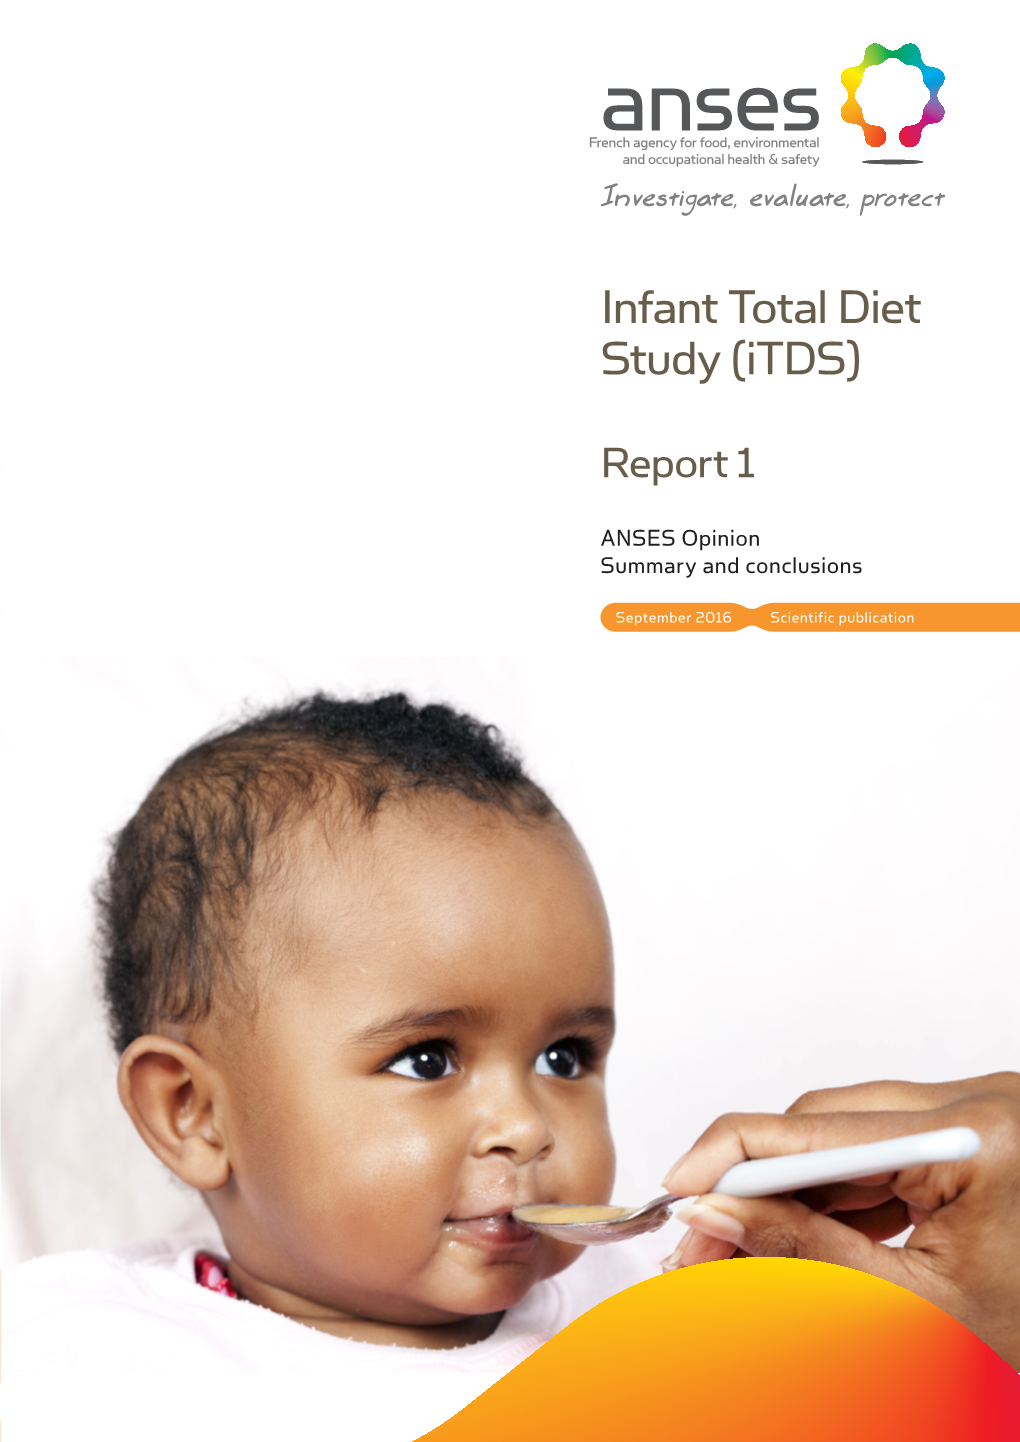 ANSES Report: Infant Total Diet Study (Itds)